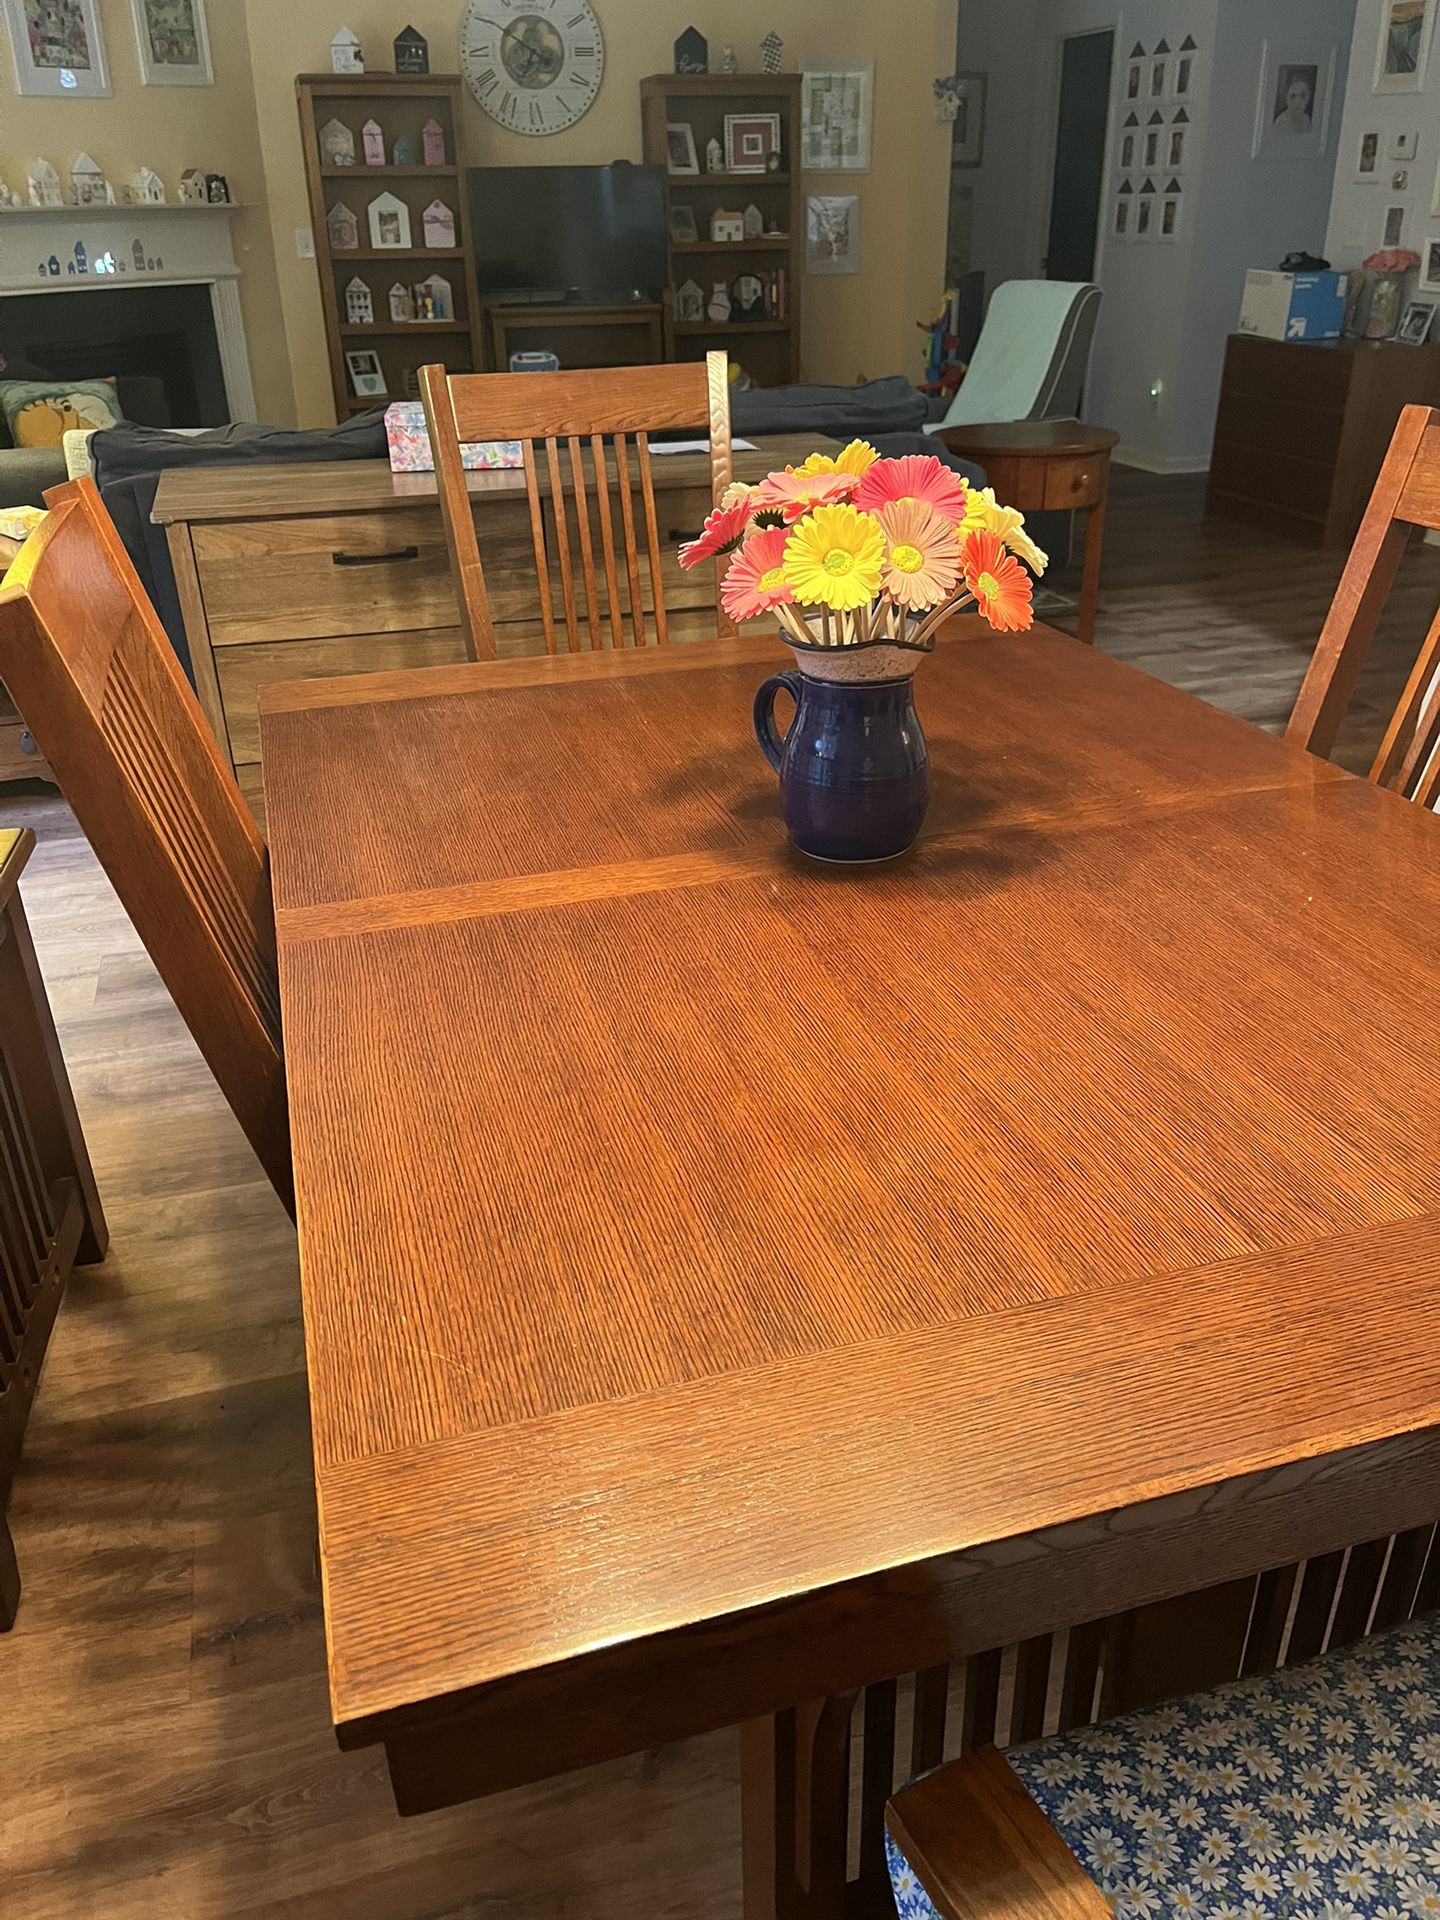 Solid Wood Dining Room Table With 6 Chairs In Great Condition $350. 